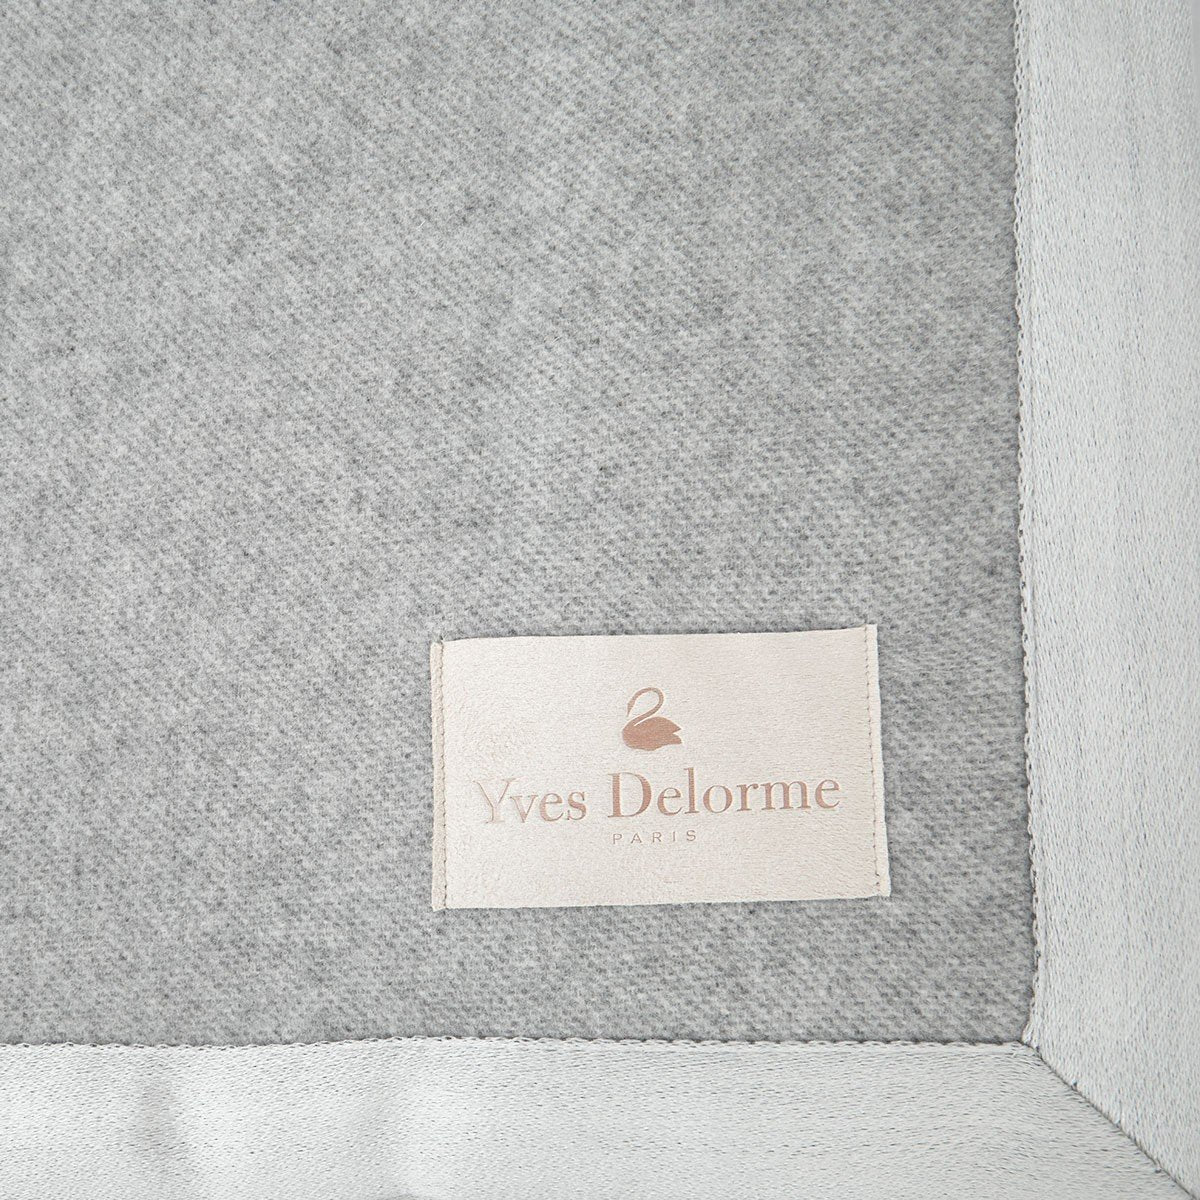 Nymphe Silver Cashmere Blanket - Yves Delorme - Close-Up View